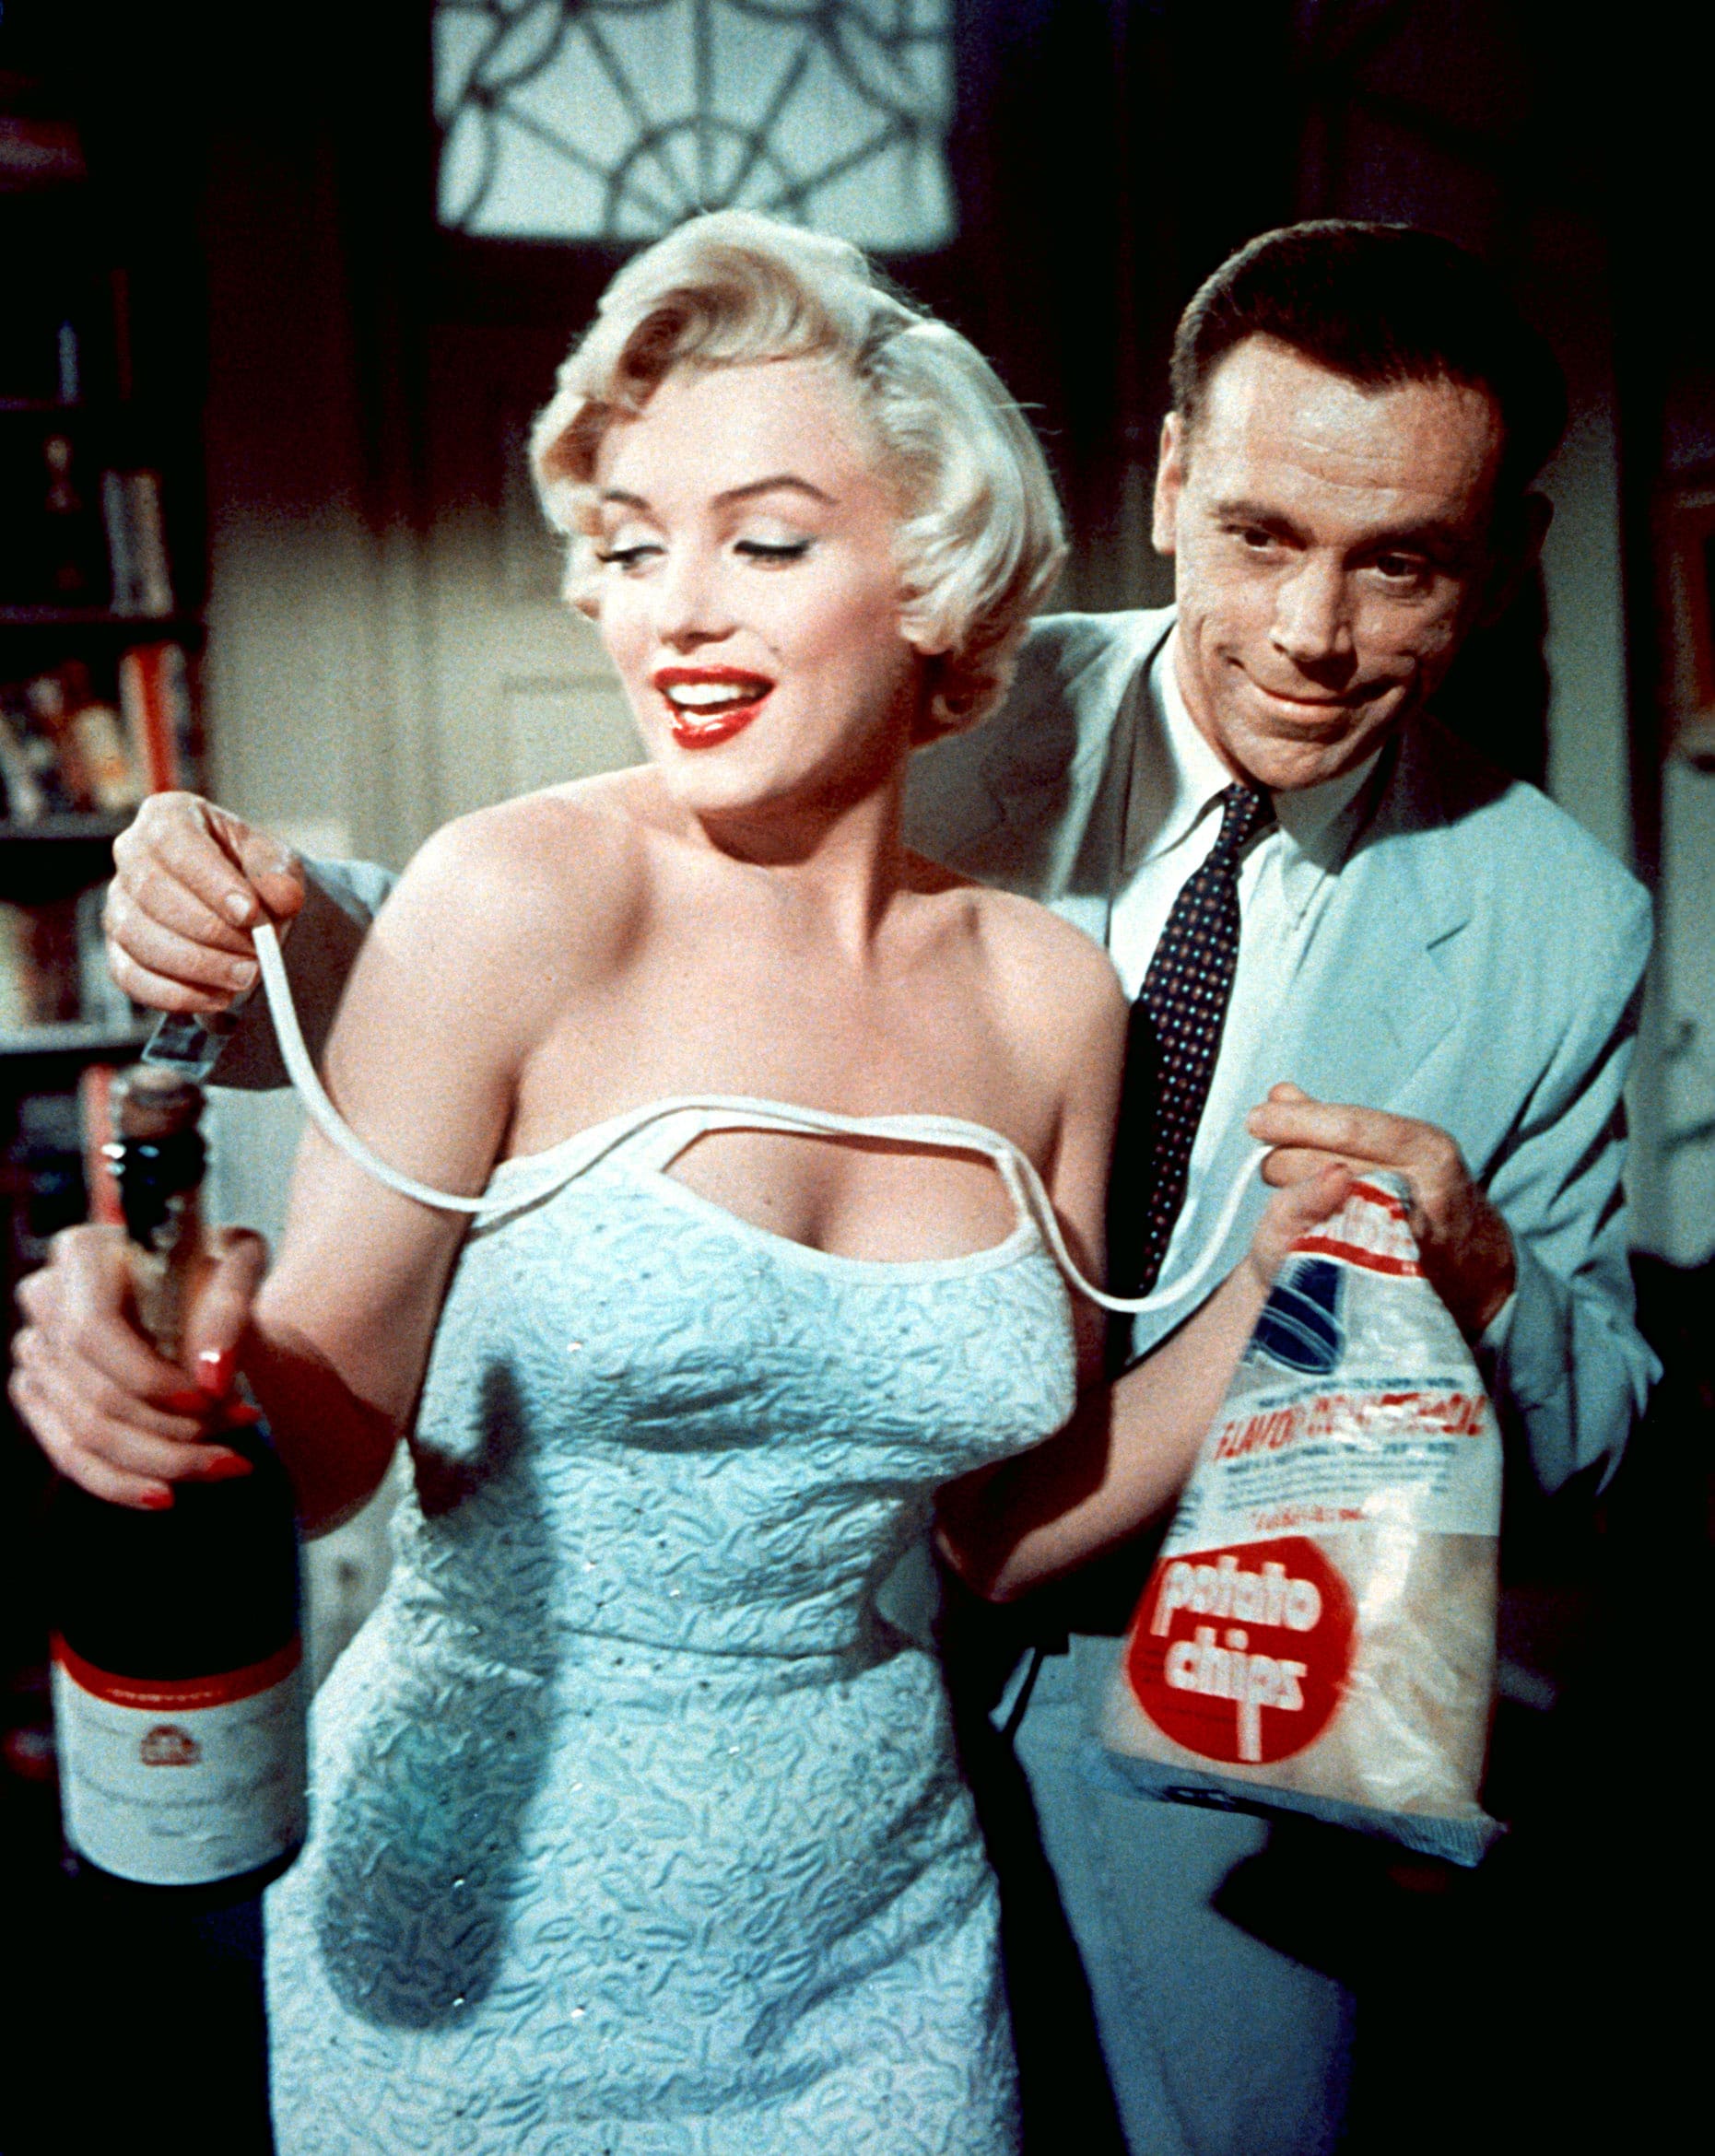 THE SEVEN YEAR ITCH, Marilyn Monroe, Tom Ewell, 1955